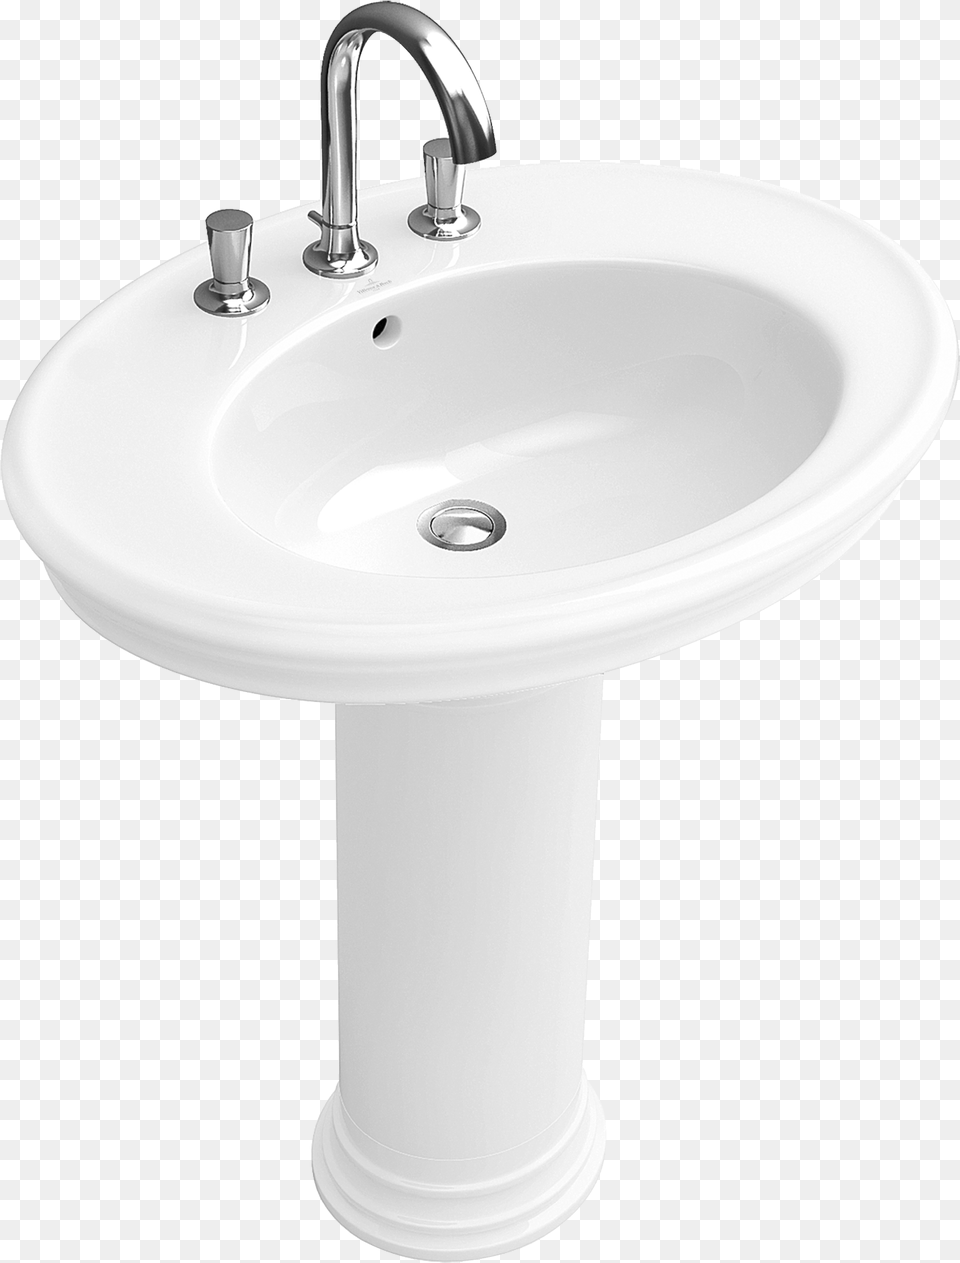 Sink Small Bathroom Sinks Wash Basin Water Tap, Sink Faucet Png